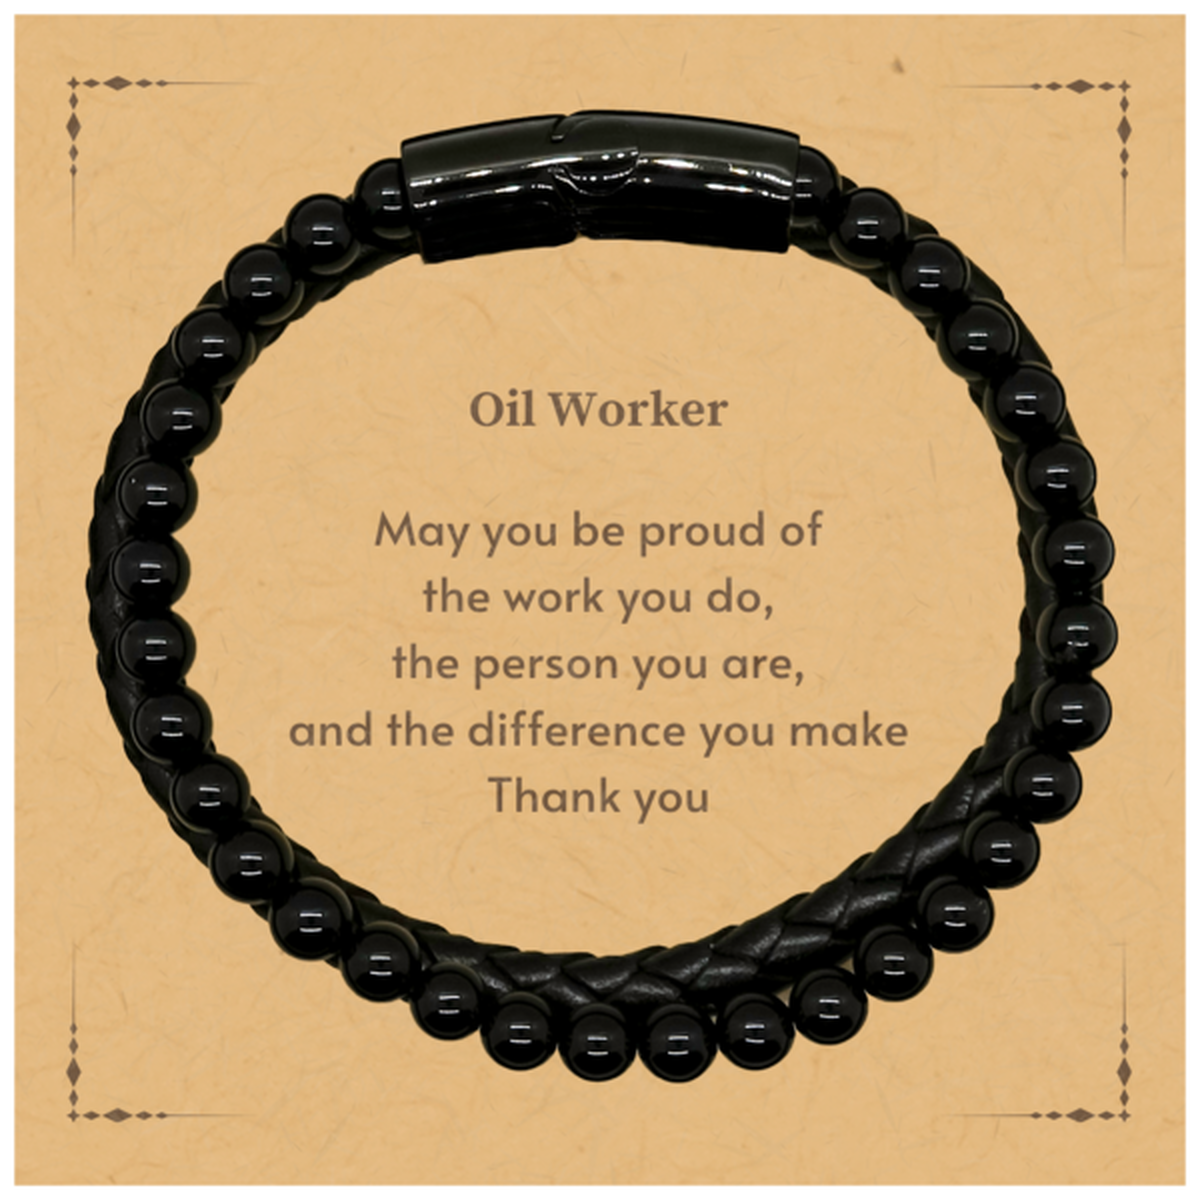 Heartwarming Stone Leather Bracelets Retirement Coworkers Gifts for Oil Worker, Oil Worker May You be proud of the work you do, the person you are Gifts for Boss Men Women Friends